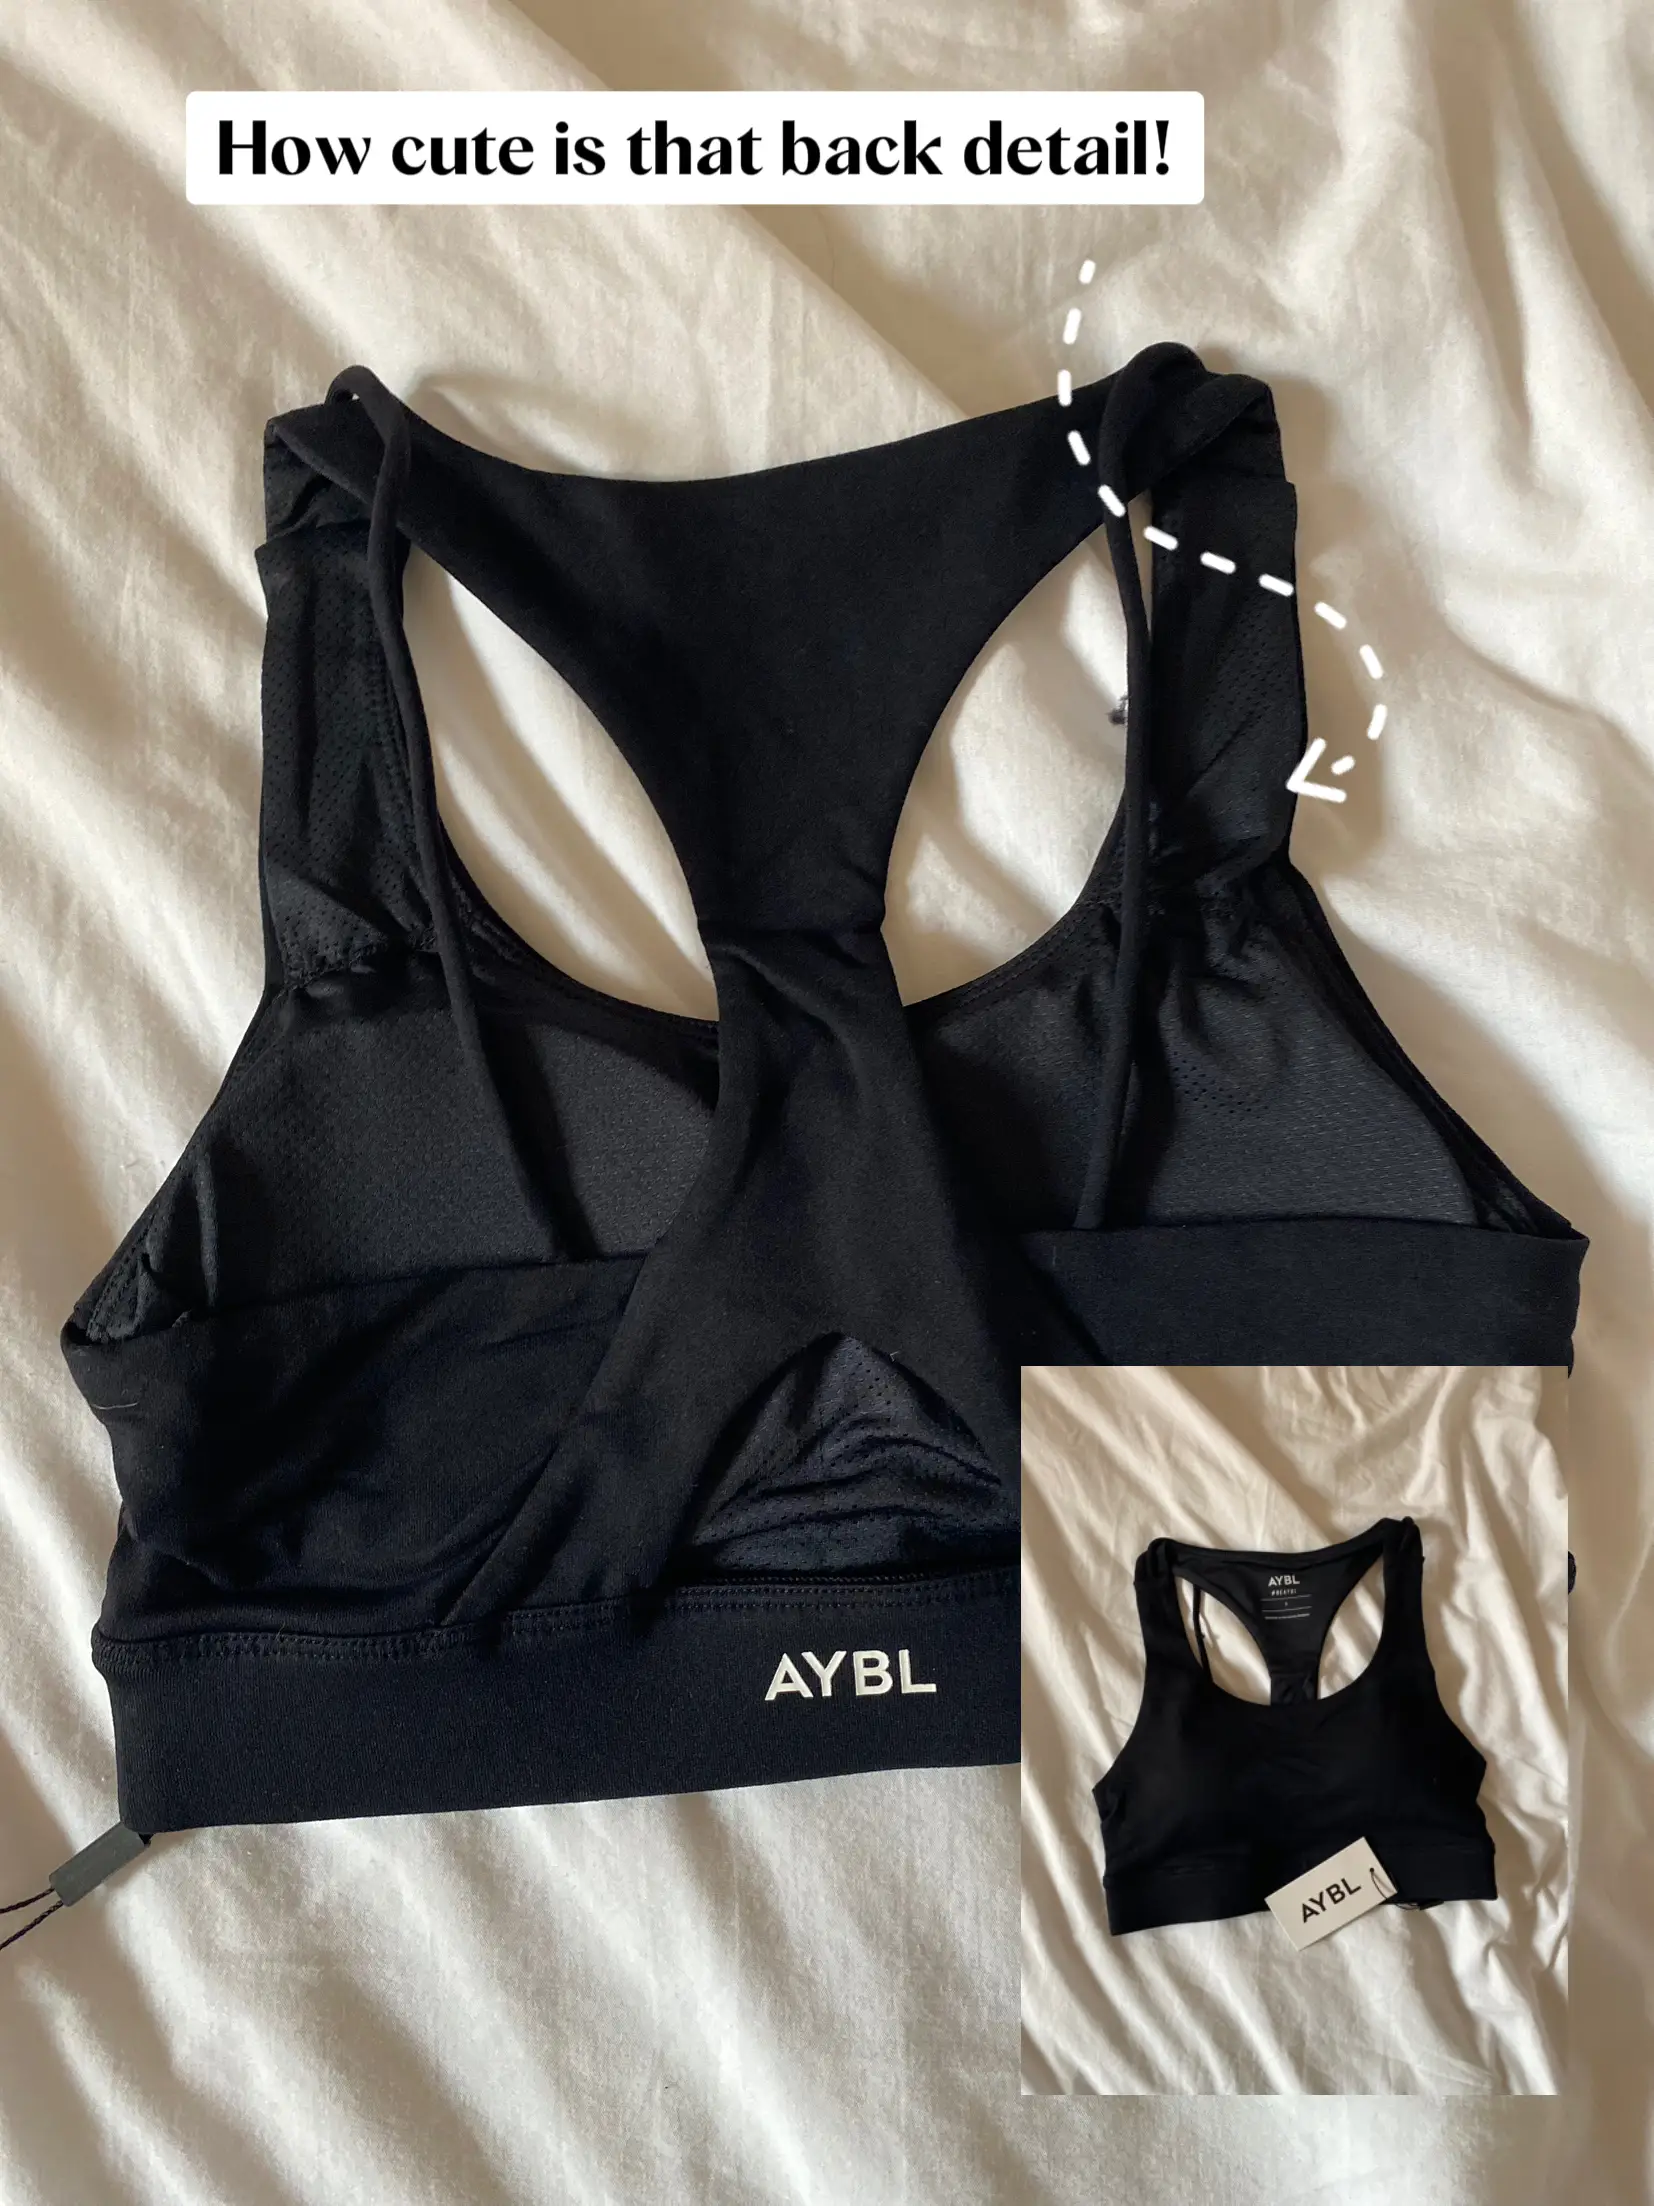 AYBL Balance V2 Seamless - Speckle Black  Active wear, Summer outfits,  Fitness activewear